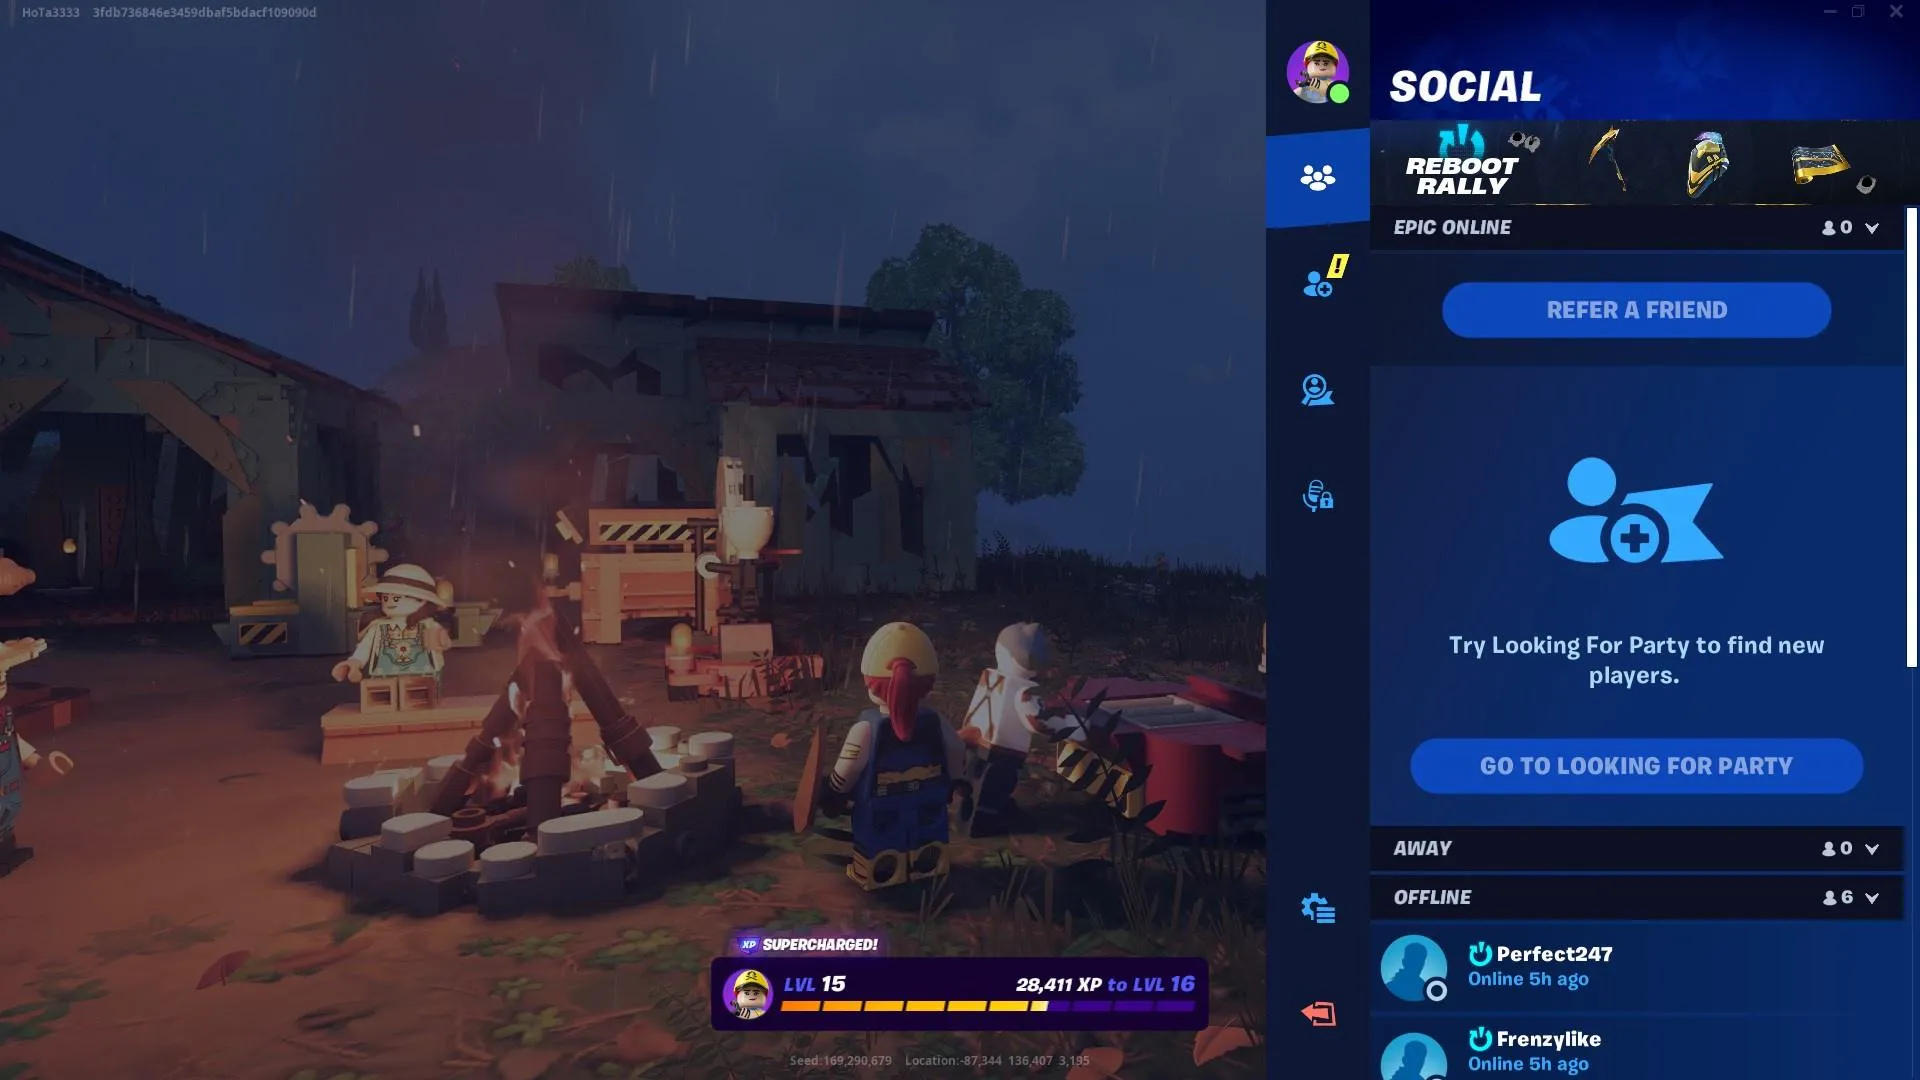 ow to Share Keys and Invite Friends To Your World in LEGO Fortnite